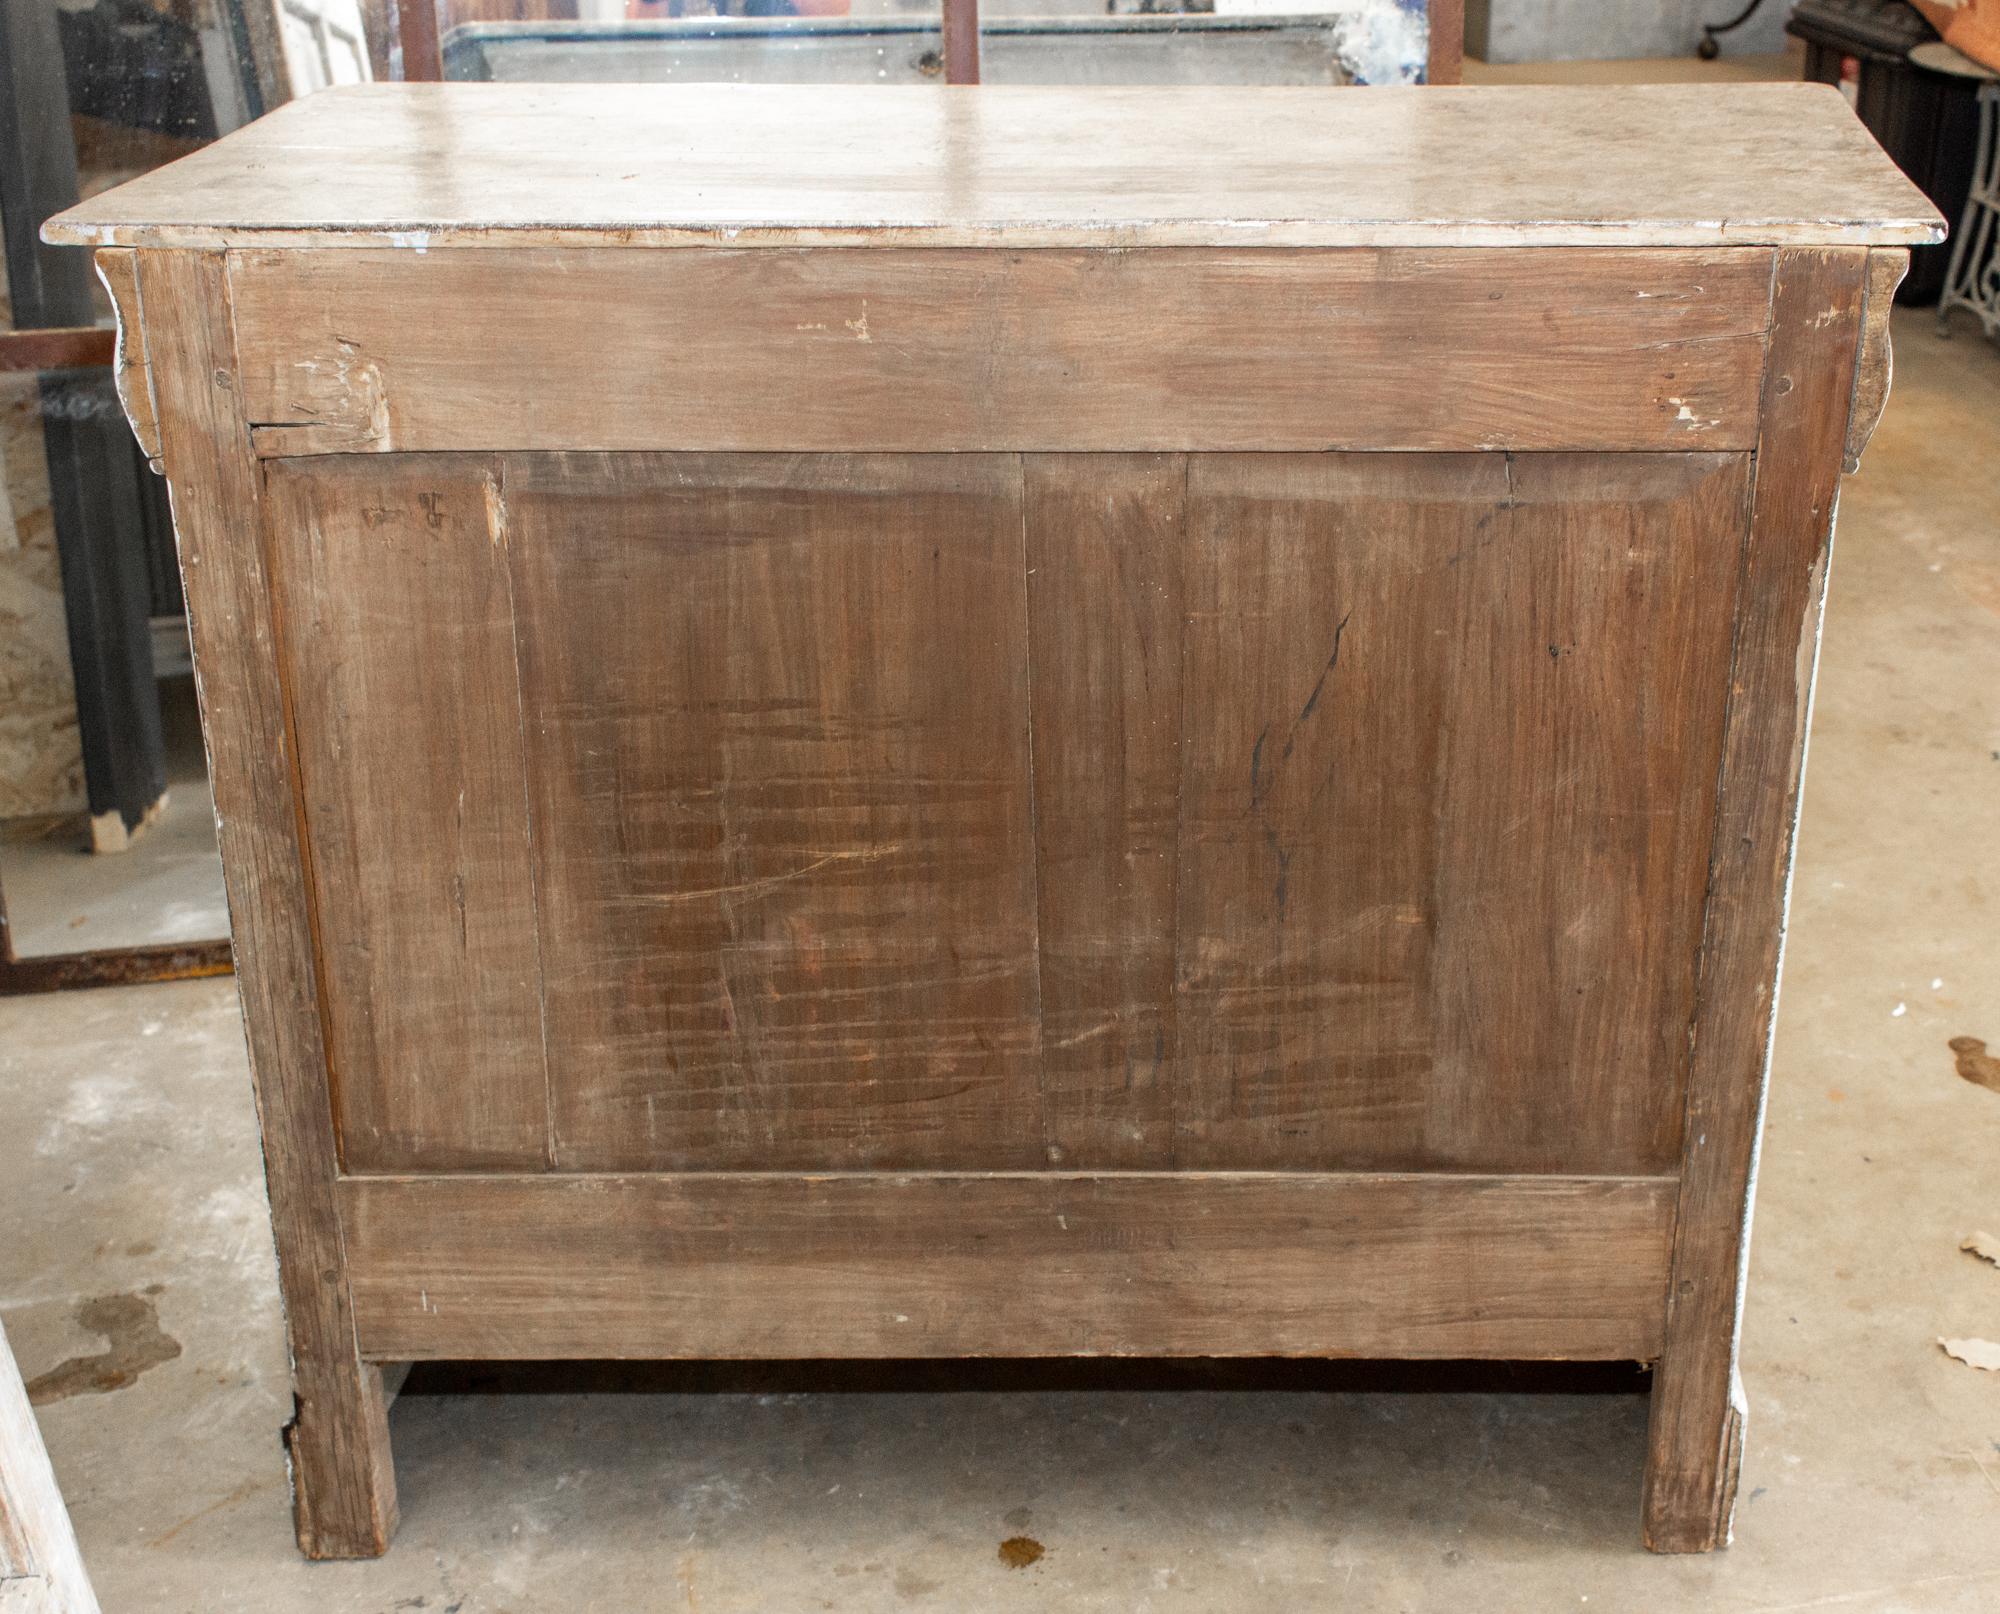 Antique French Pine Buffet in Hand-Painted Distressed Greige Finish 15